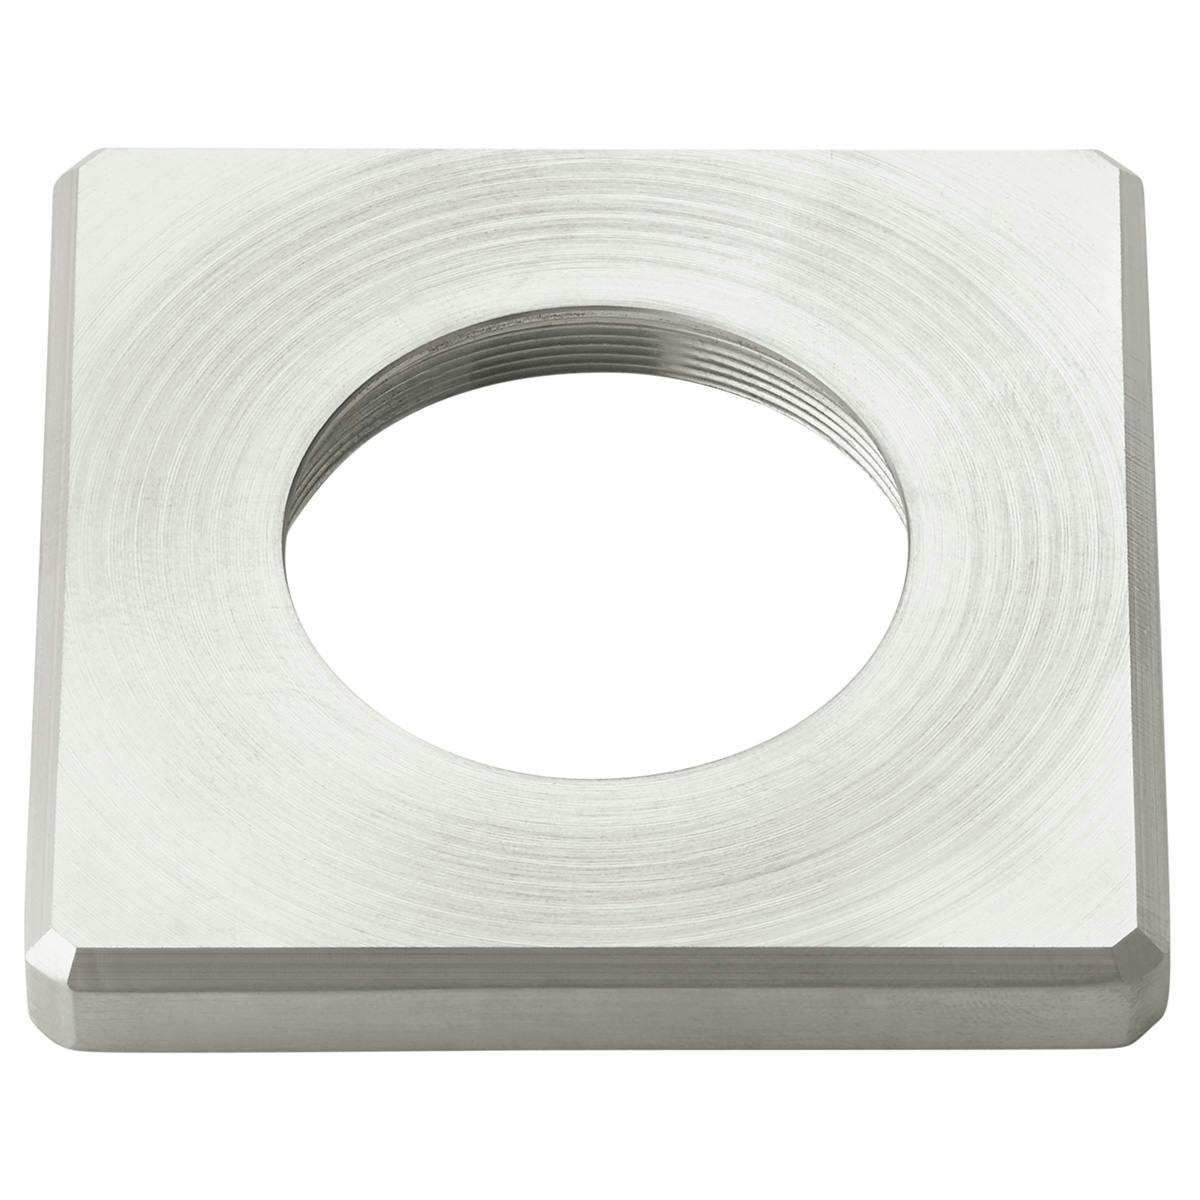 Mini Square Accessory Stainless Steel on a white background